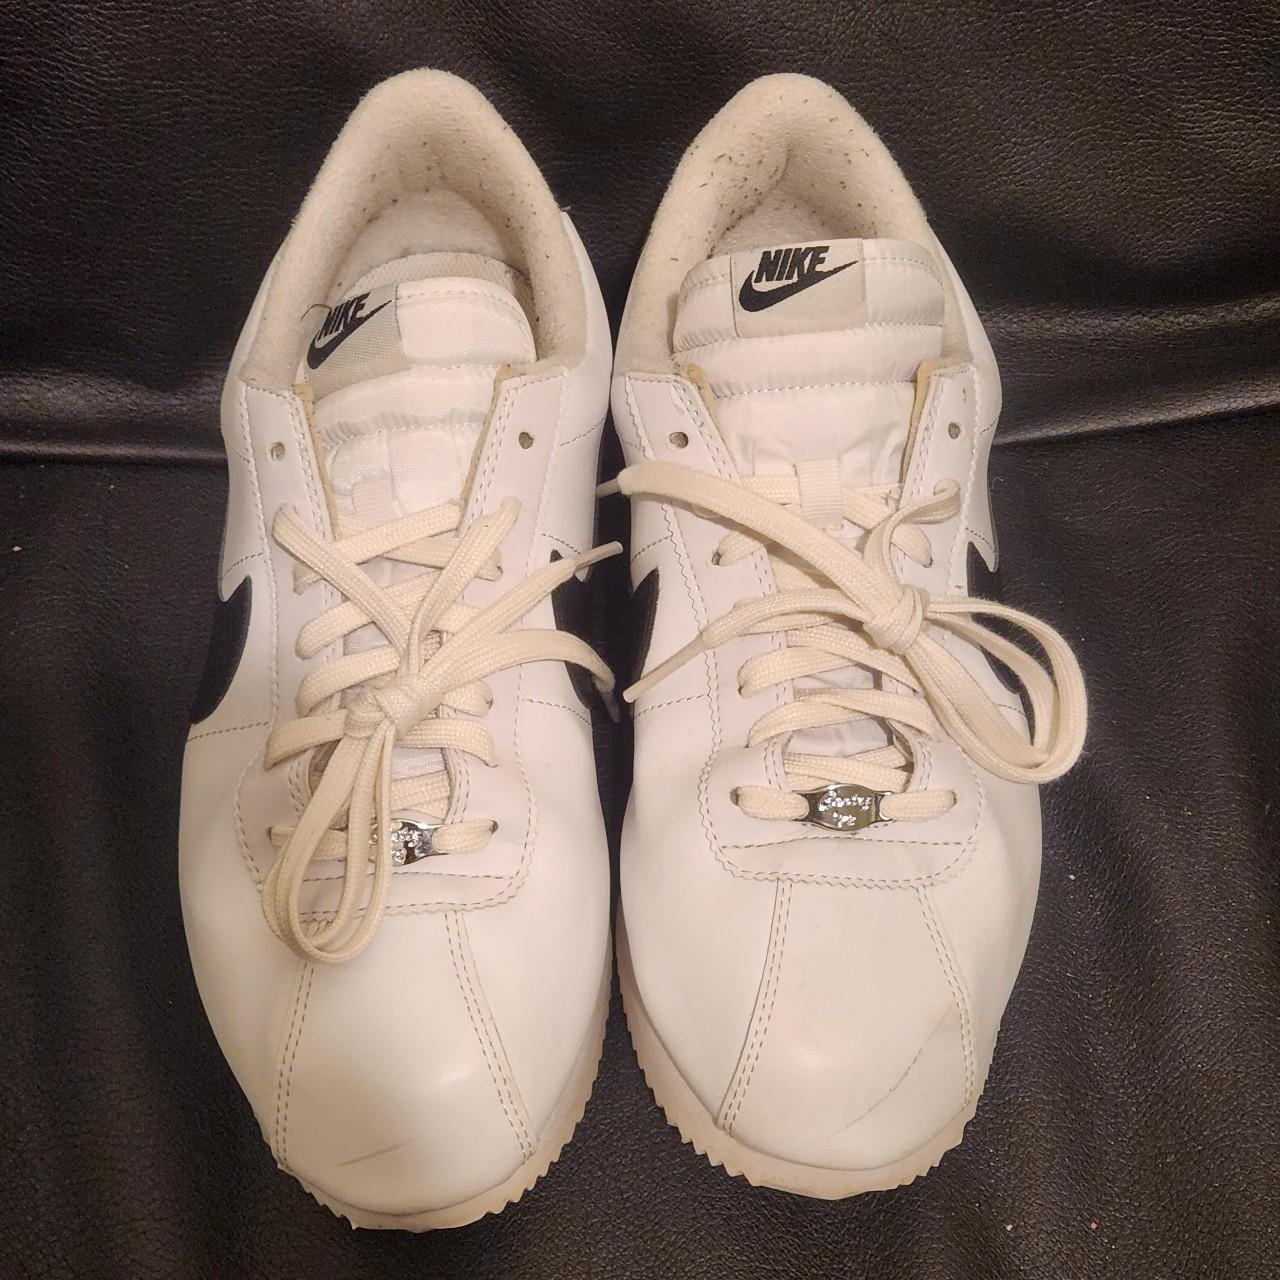 Nike Men's White and Black Trainers (2)